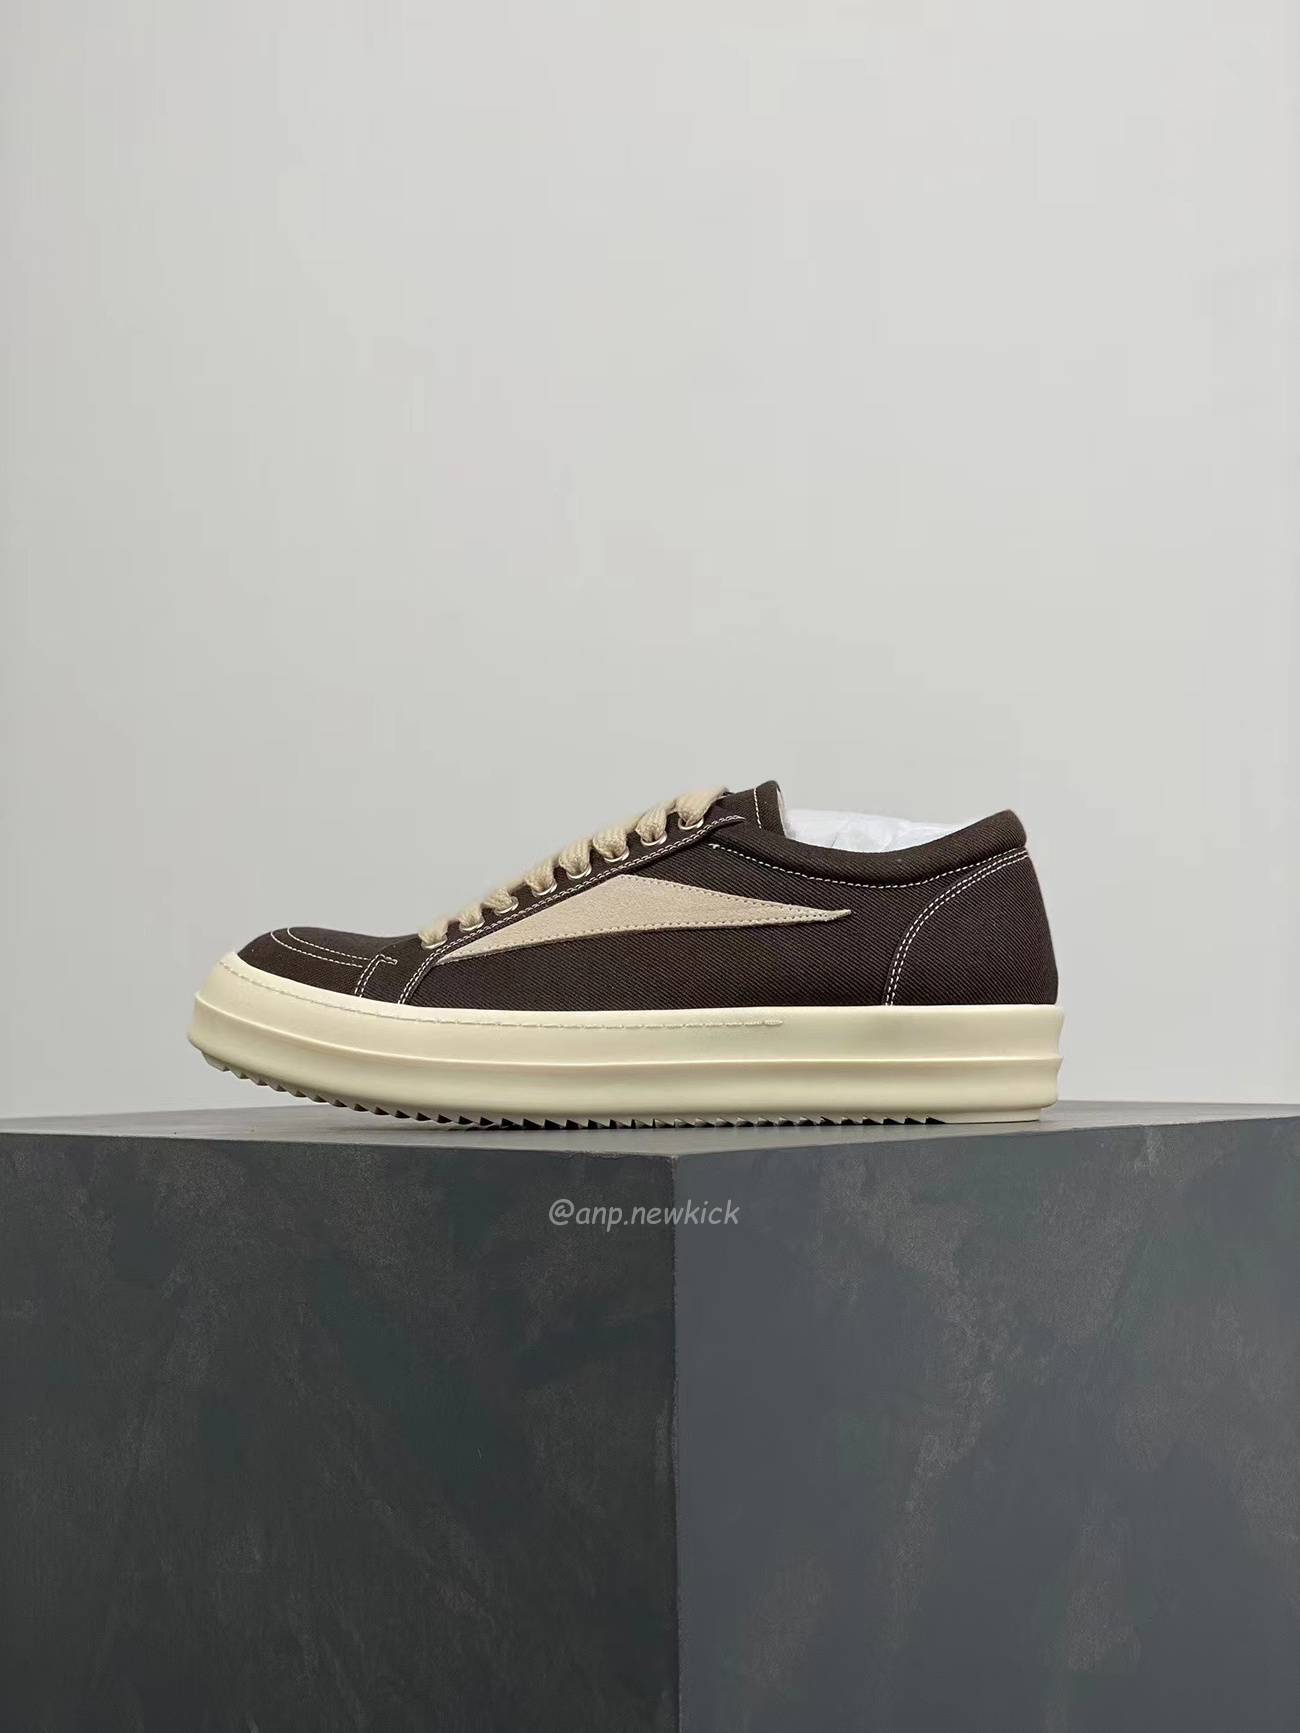 Rick Owens Leather Low Top Vintage Sneakers Suede Canvas Black Taupe Grey Faded Pnk Pearl Milk Dark Dust (17) - newkick.org